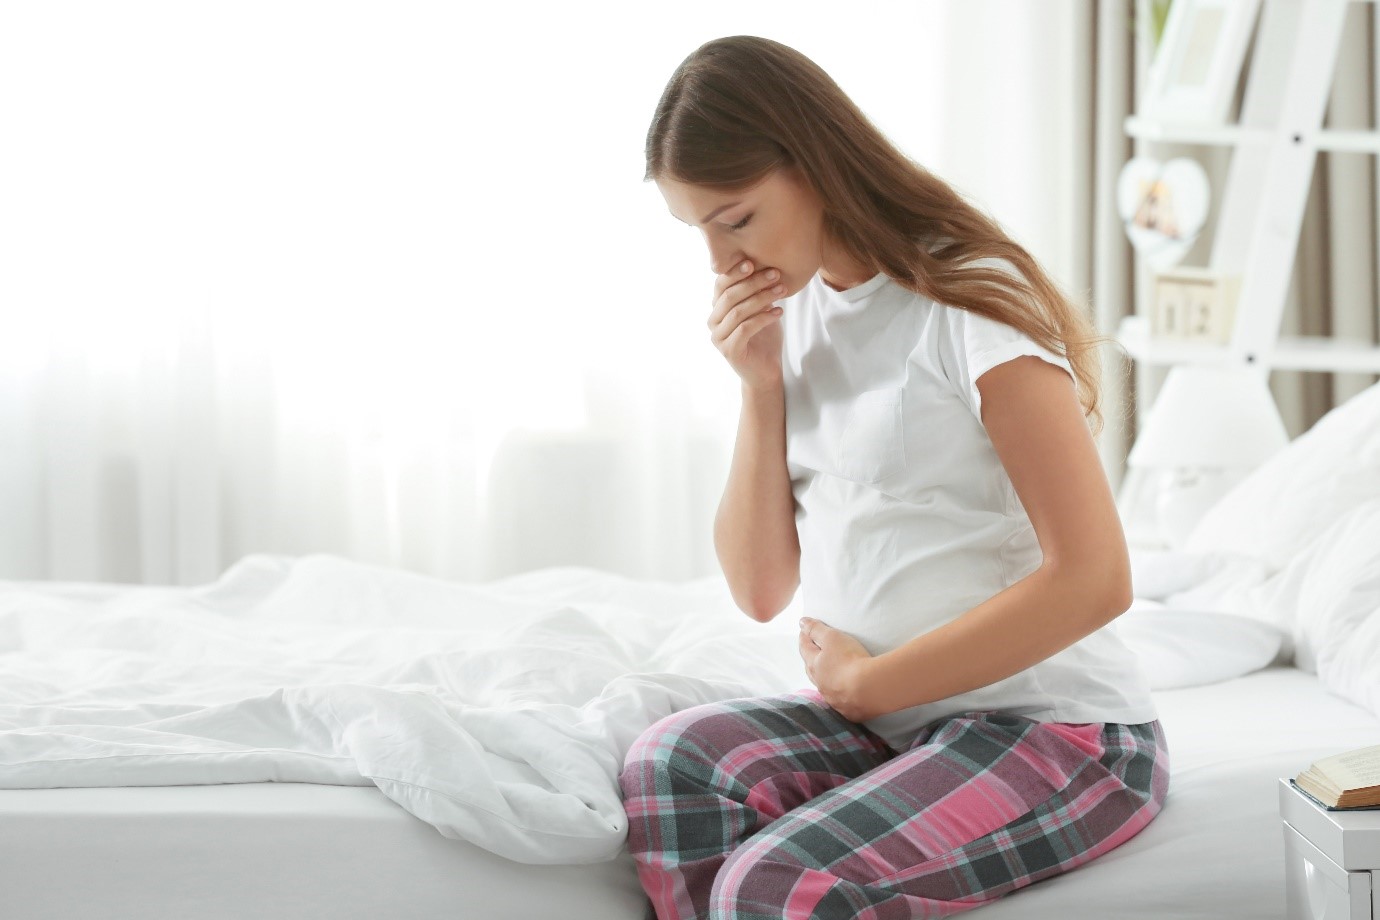 Top 10 Tips To Ease Morning Sickness